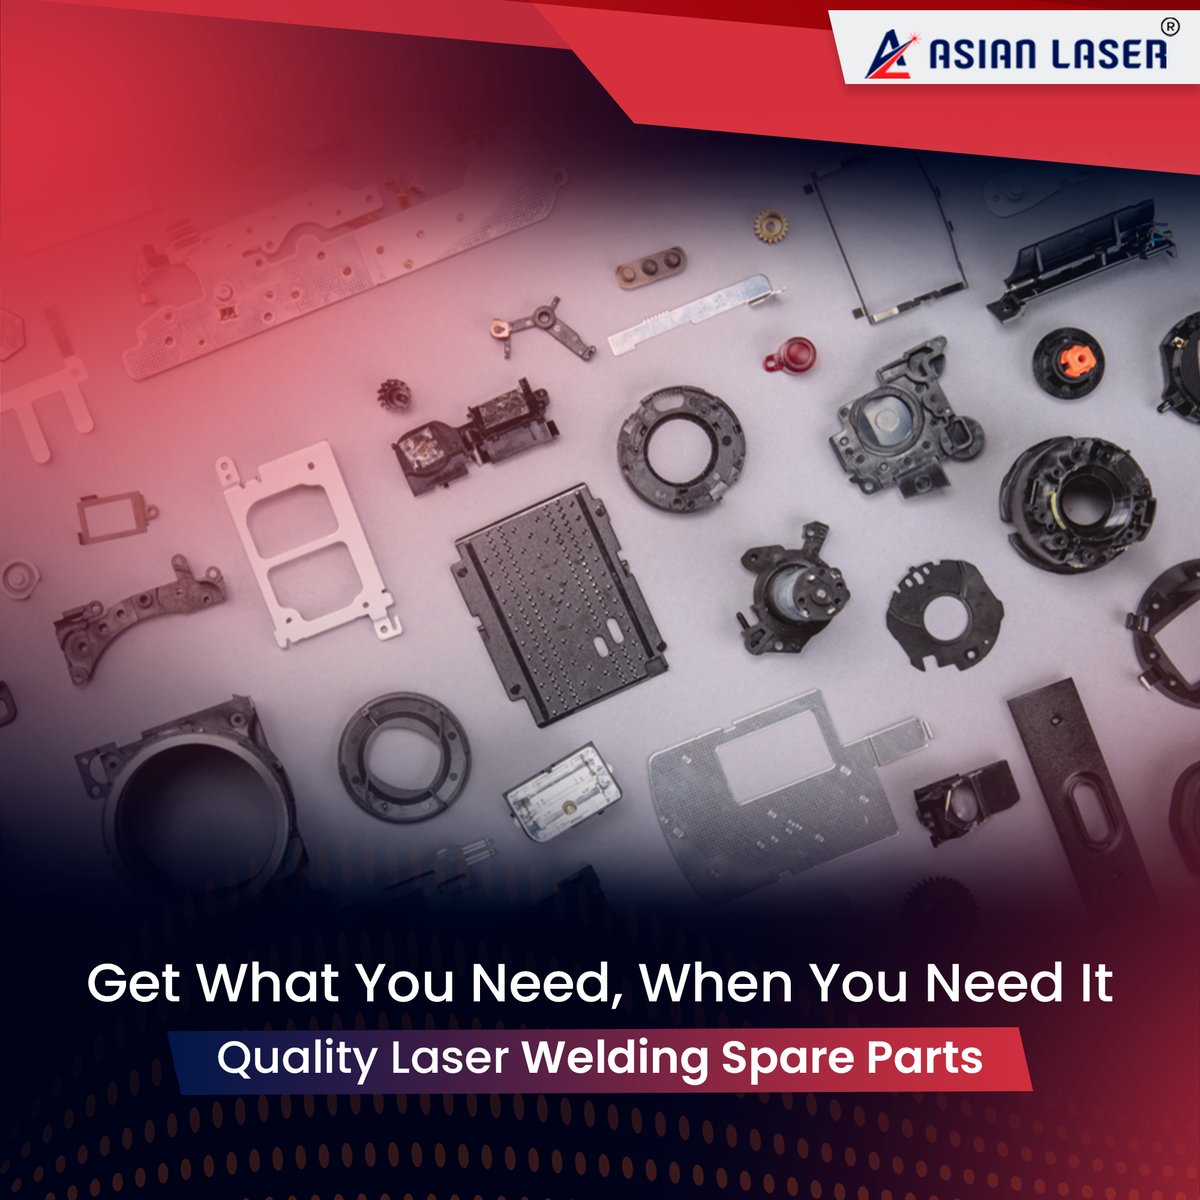 We maintain a fully stocked inventory that includes Spare Parts to meet all your urgent needs.
.
.
#AsianLaser #AsianLaserIndia #Welding #SpareParts #LaserWeldingMachine #WeldingMachine #JewelleryIndustry #JewelryManufacturing #MetalWelding #AdvancedTechnology #Andheri #Mumbai